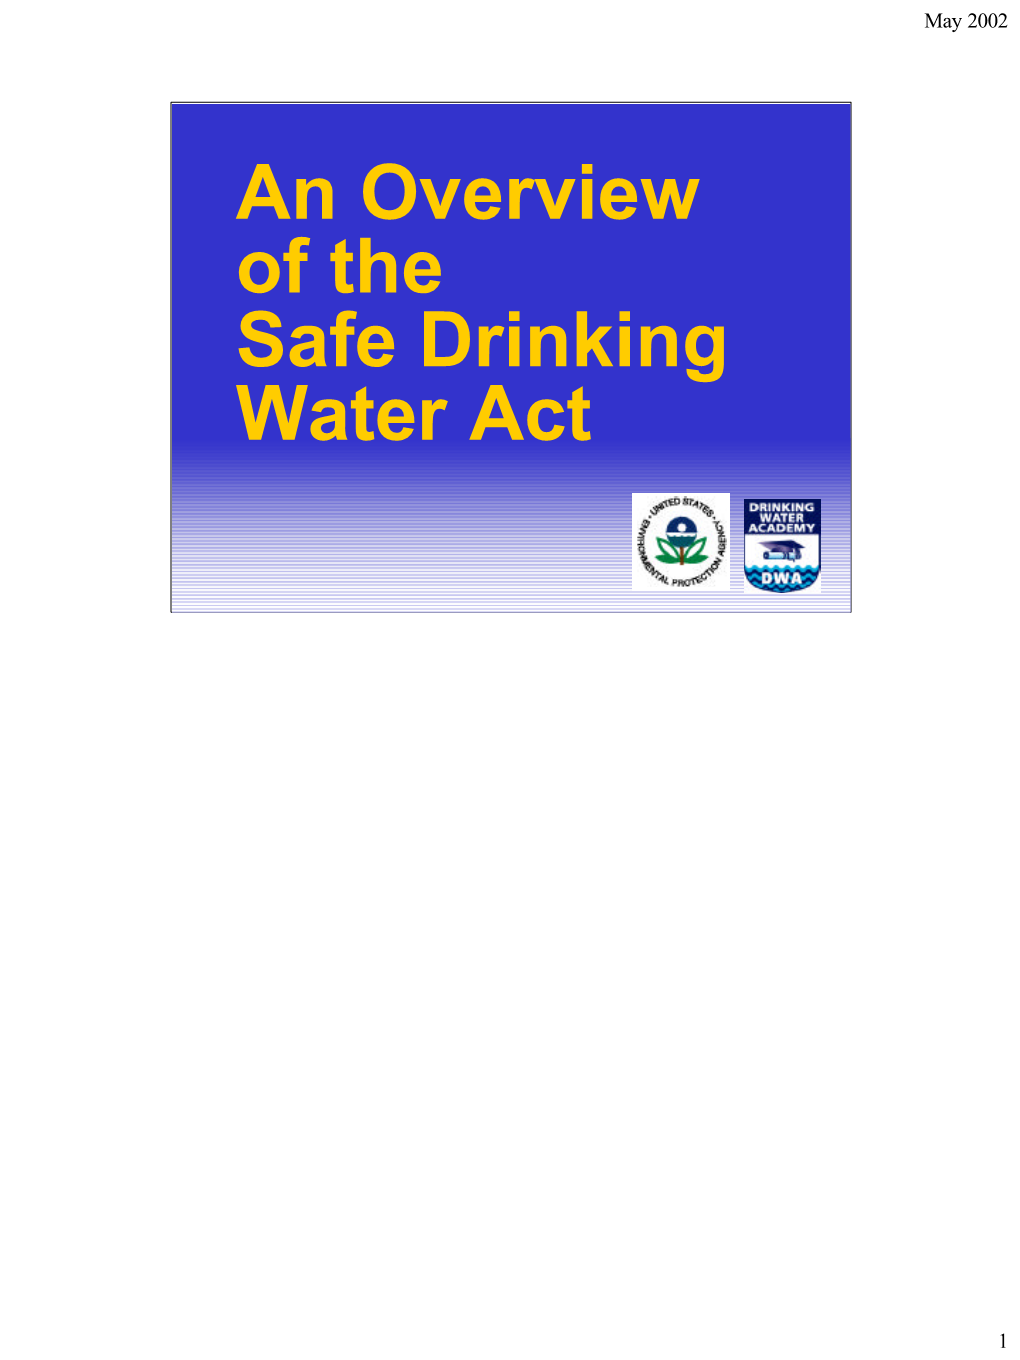 An Overview of the Safe Drinking Water Act